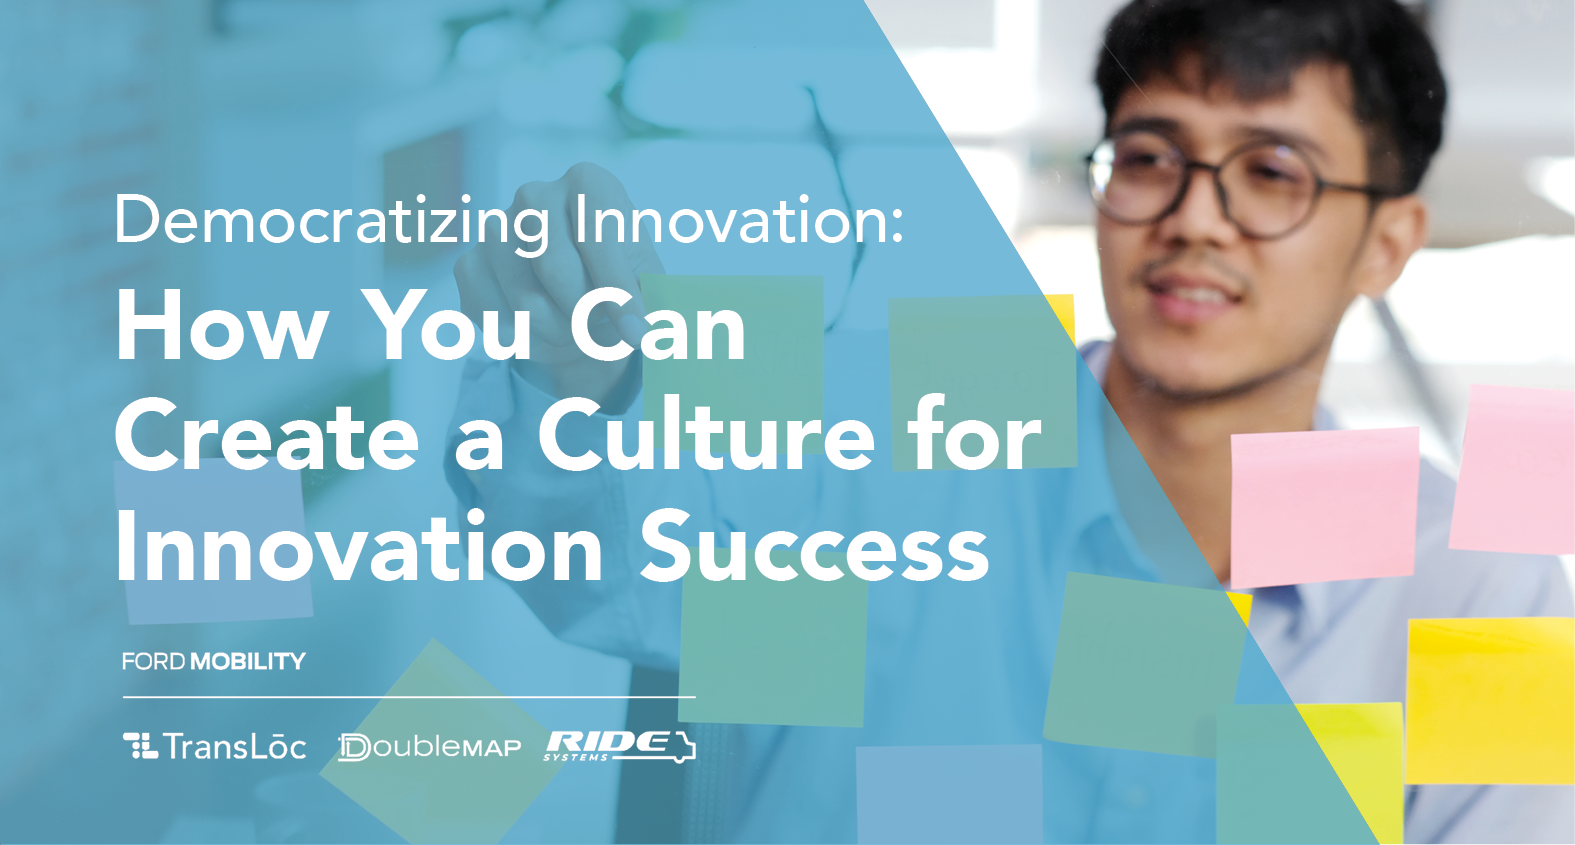 How You Can Create a Culture for Innovation Success